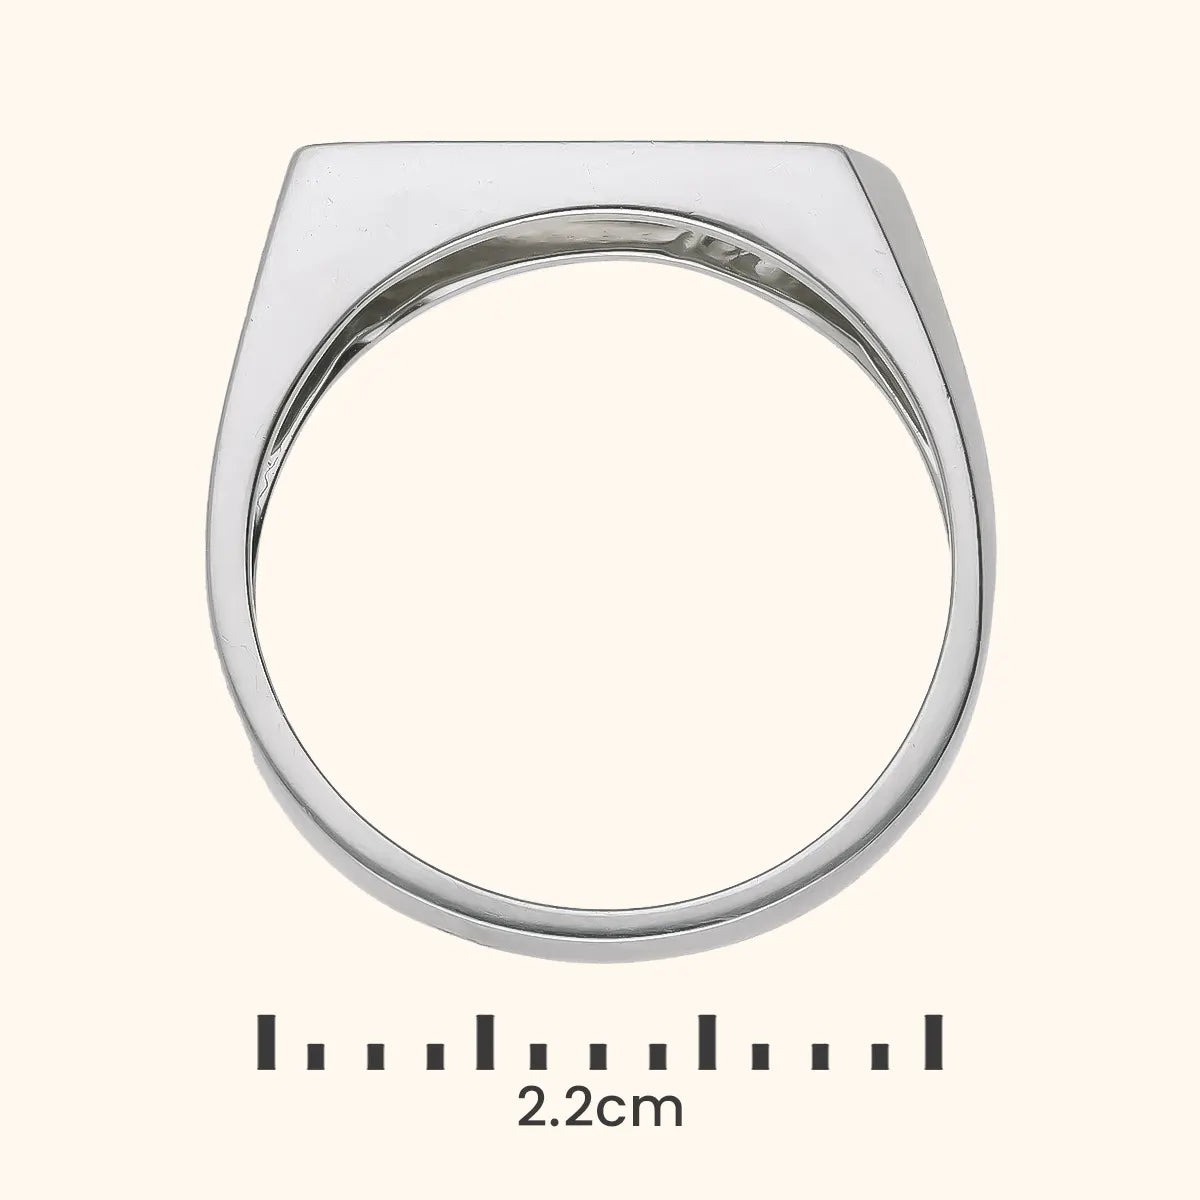 The Concrete Men's Gold Band Ring